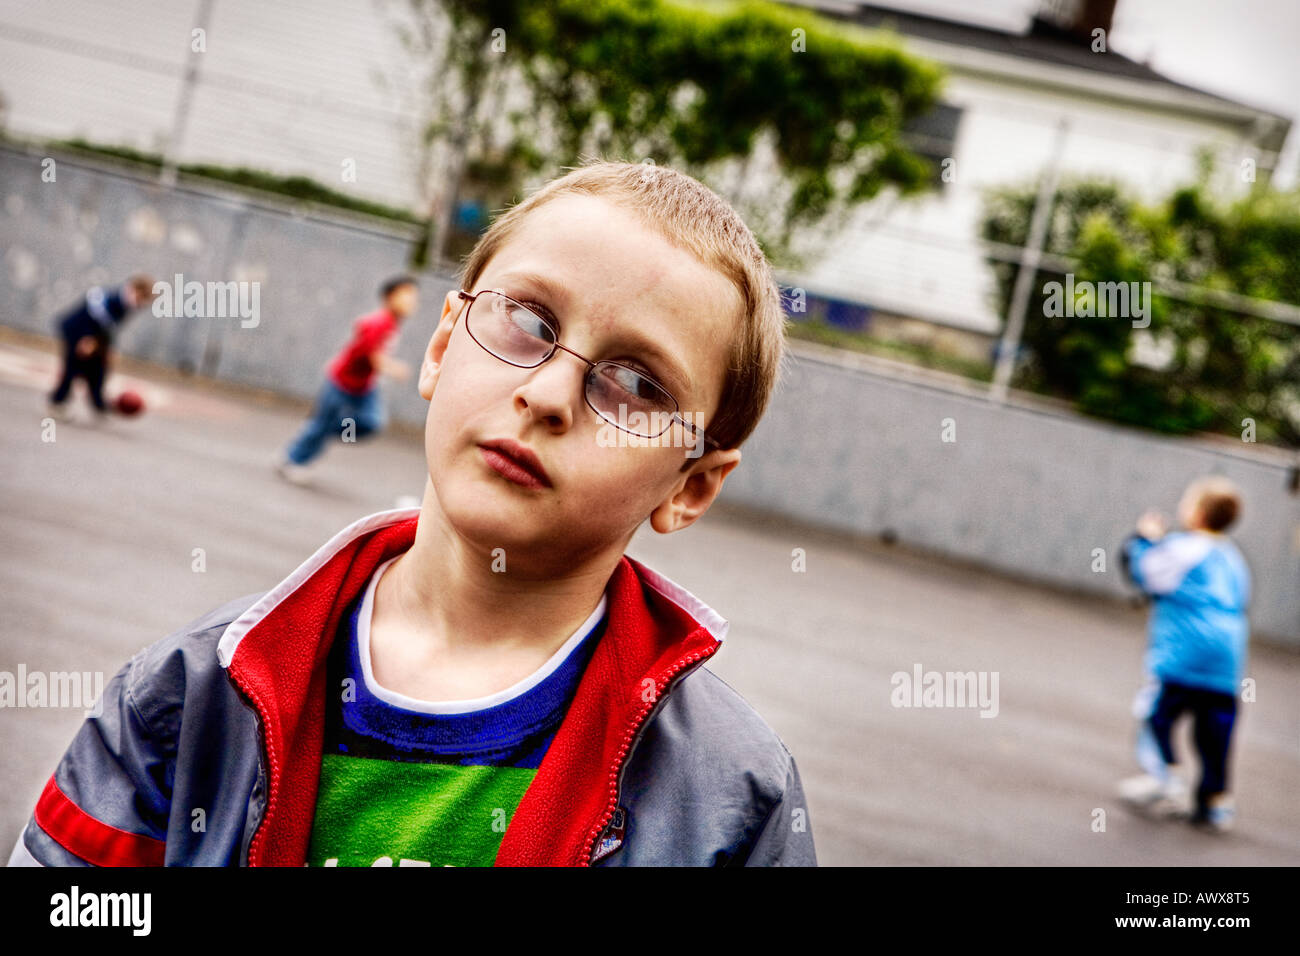 young boy wearing glasses standing on a playground rolling his eyes while other kids are playing ball behind in the background Stock Photo